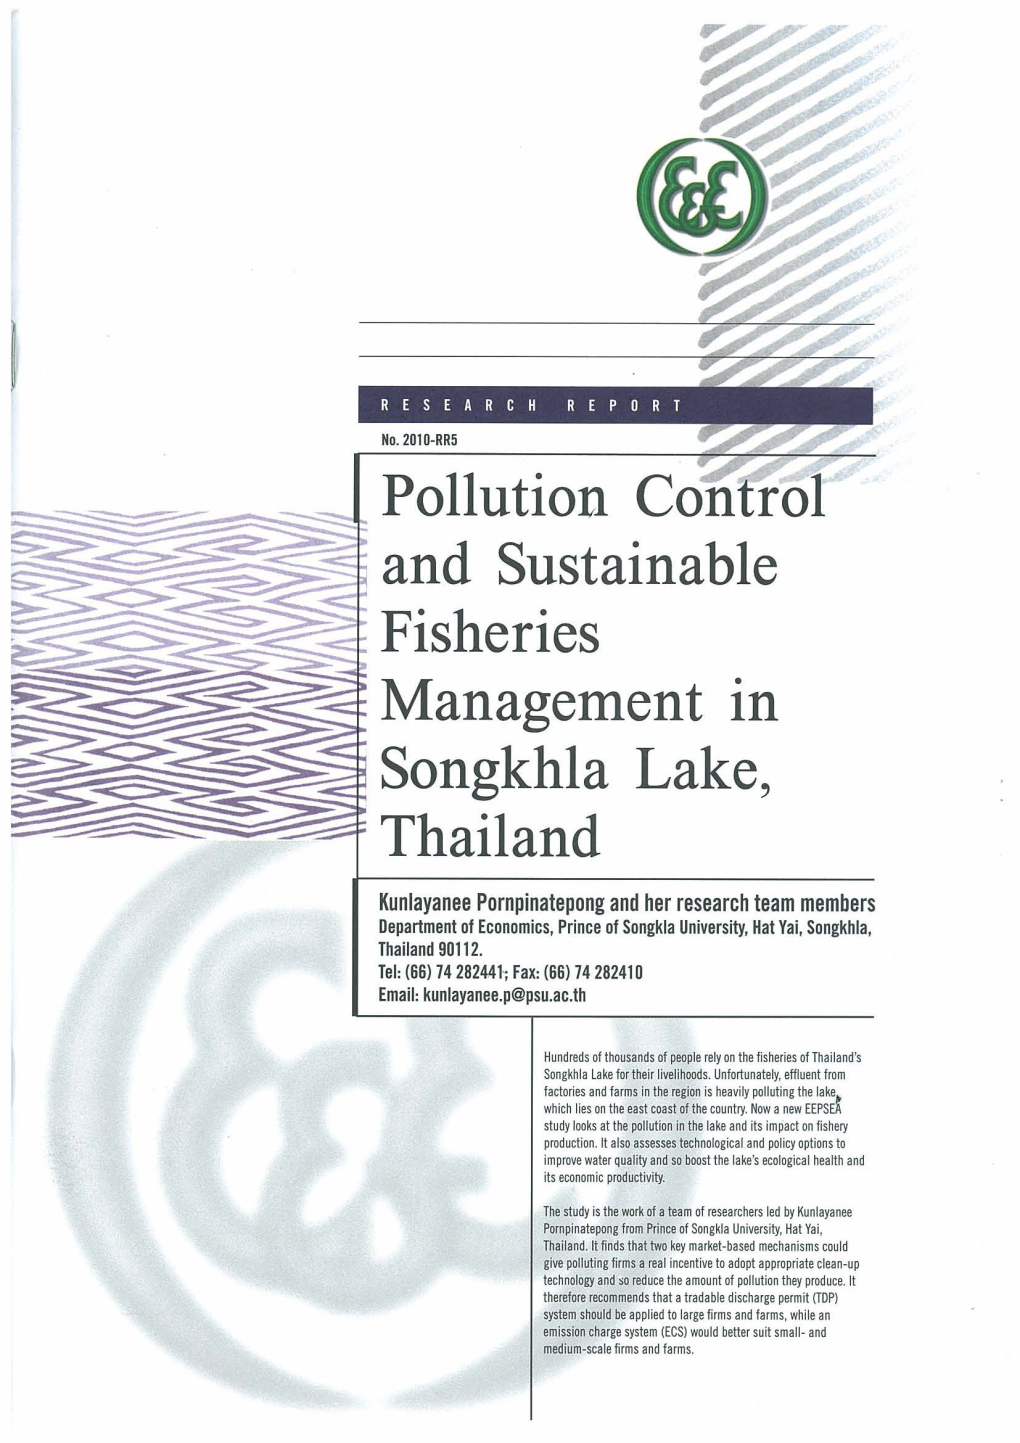 Fisheries Management in Songkhla Lake, Thailand